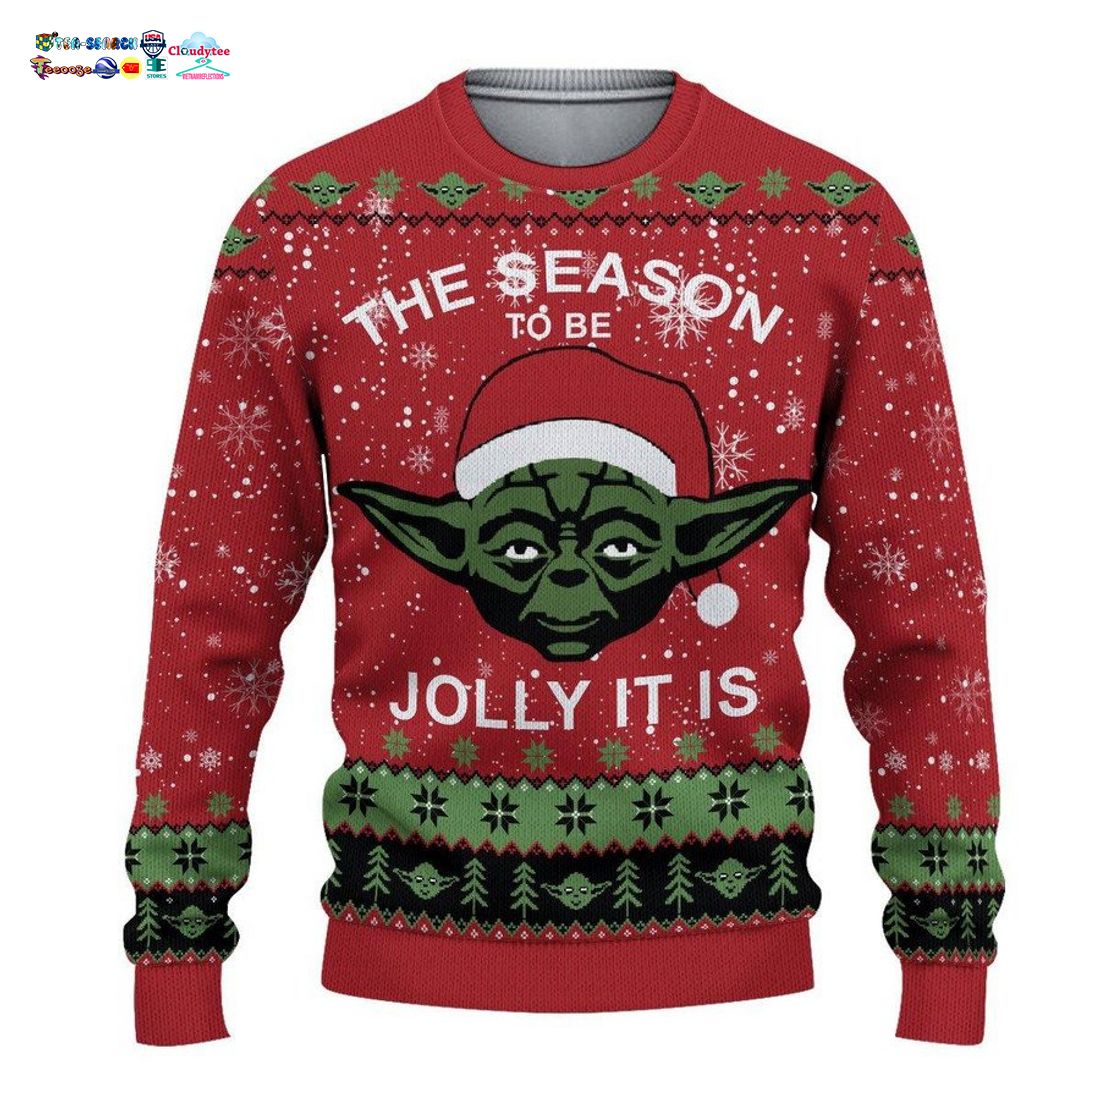 Baby Yoda The Season To Be Jolly It Is Ugly Christmas Sweater